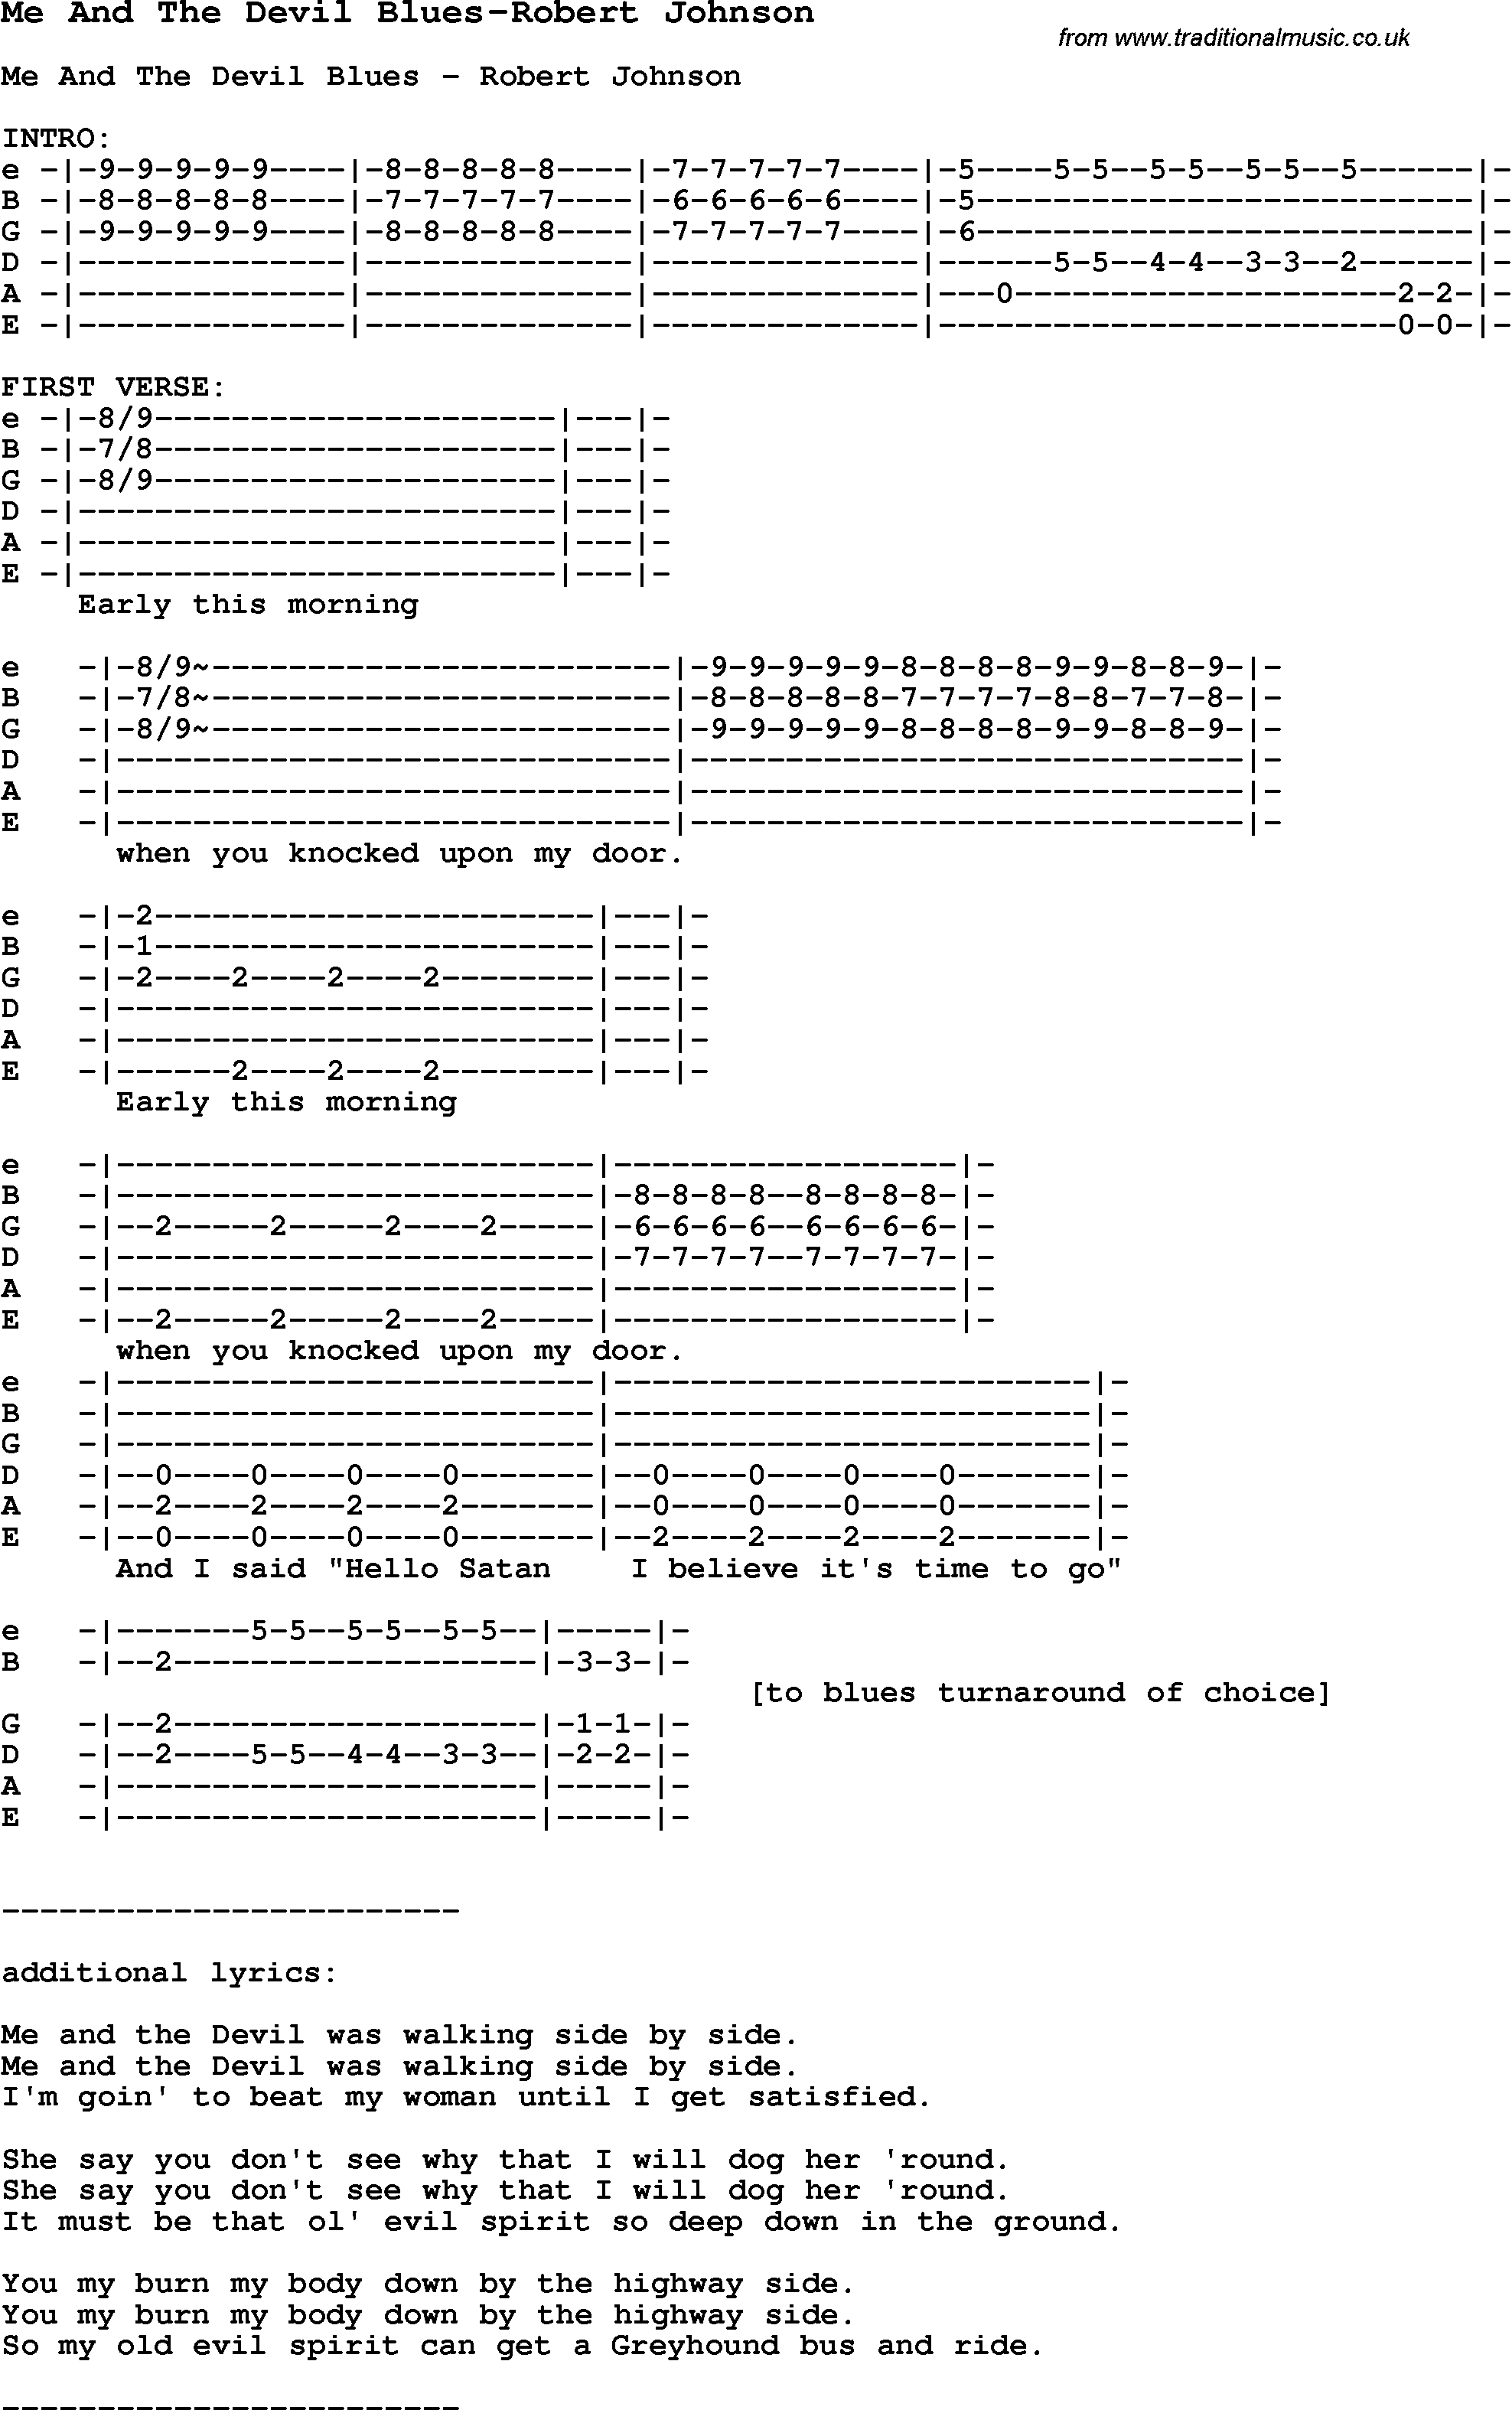 Blues Guitar Song, lyrics, chords, tablature, playing hints for Me And The Devil Blues-Robert Johnson